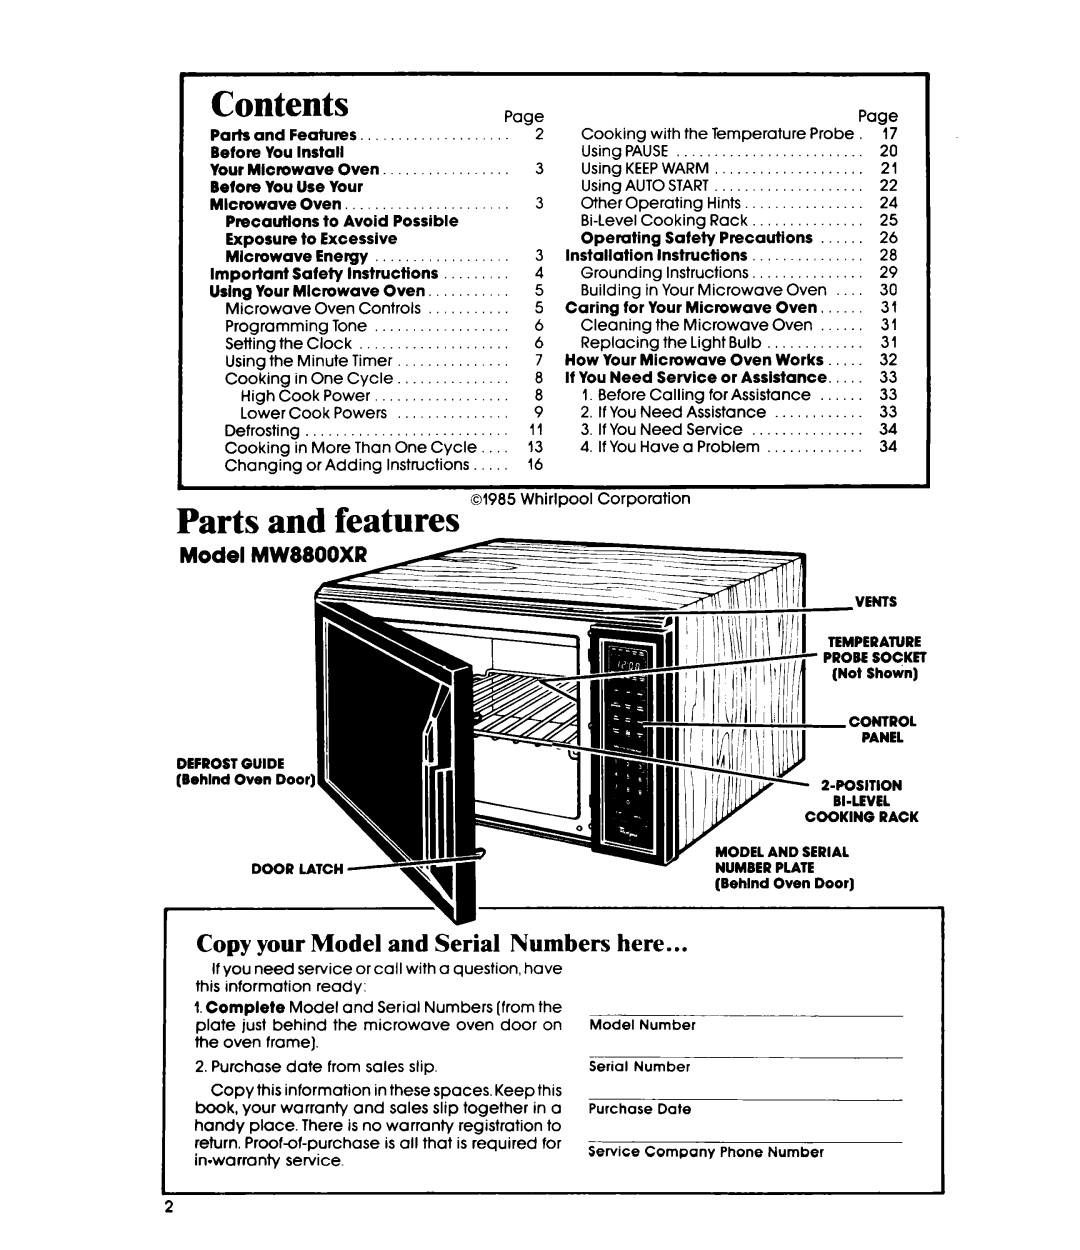 Whirlpool MW88OOXR manual Contents, Copy your Model and Serial Numbers here, Model MW8800XR 